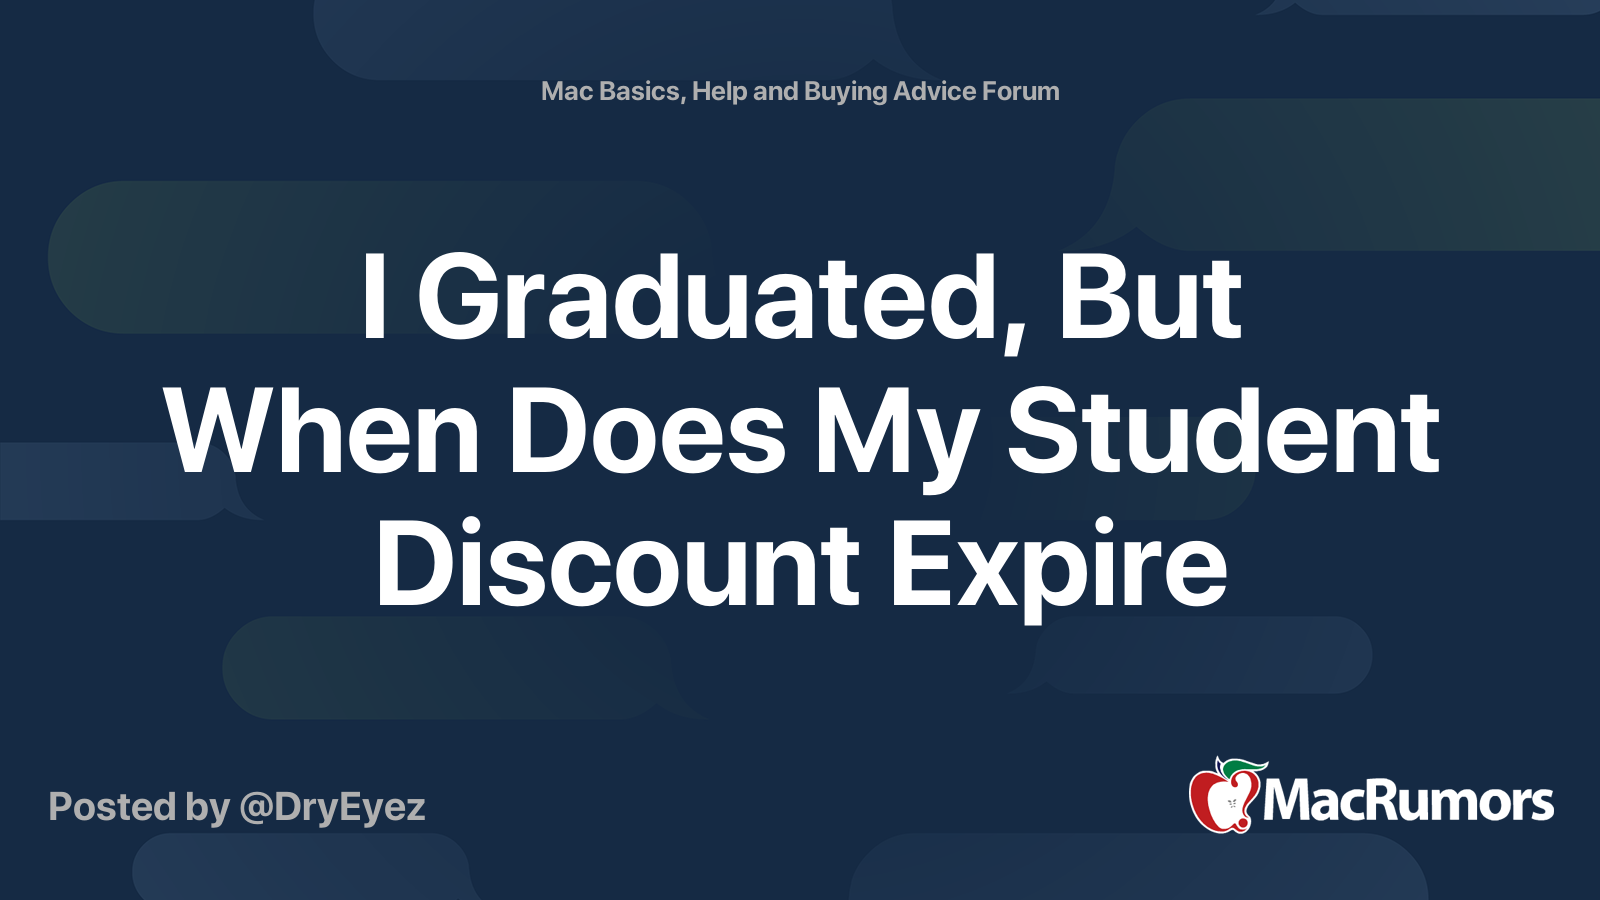 i-graduated-but-when-does-my-student-discount-expire-macrumors-forums